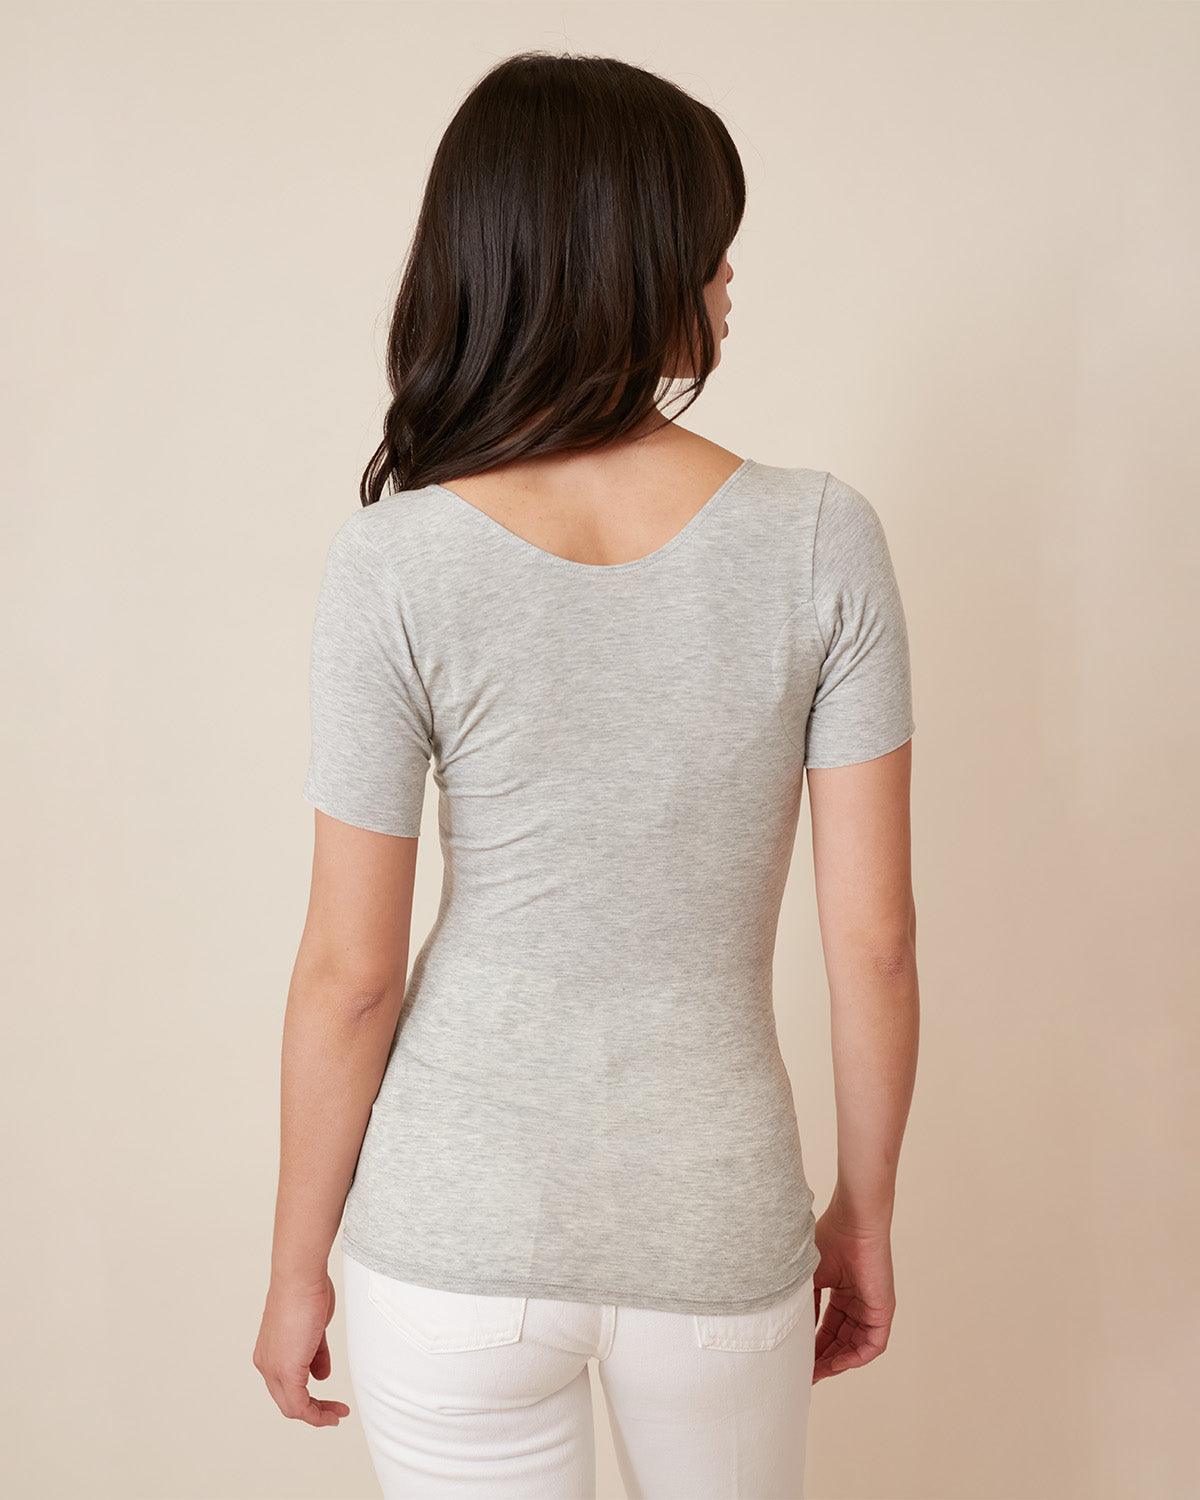 "#color_HEATHER GREY|Estyr is 5'9", wearing a size XS